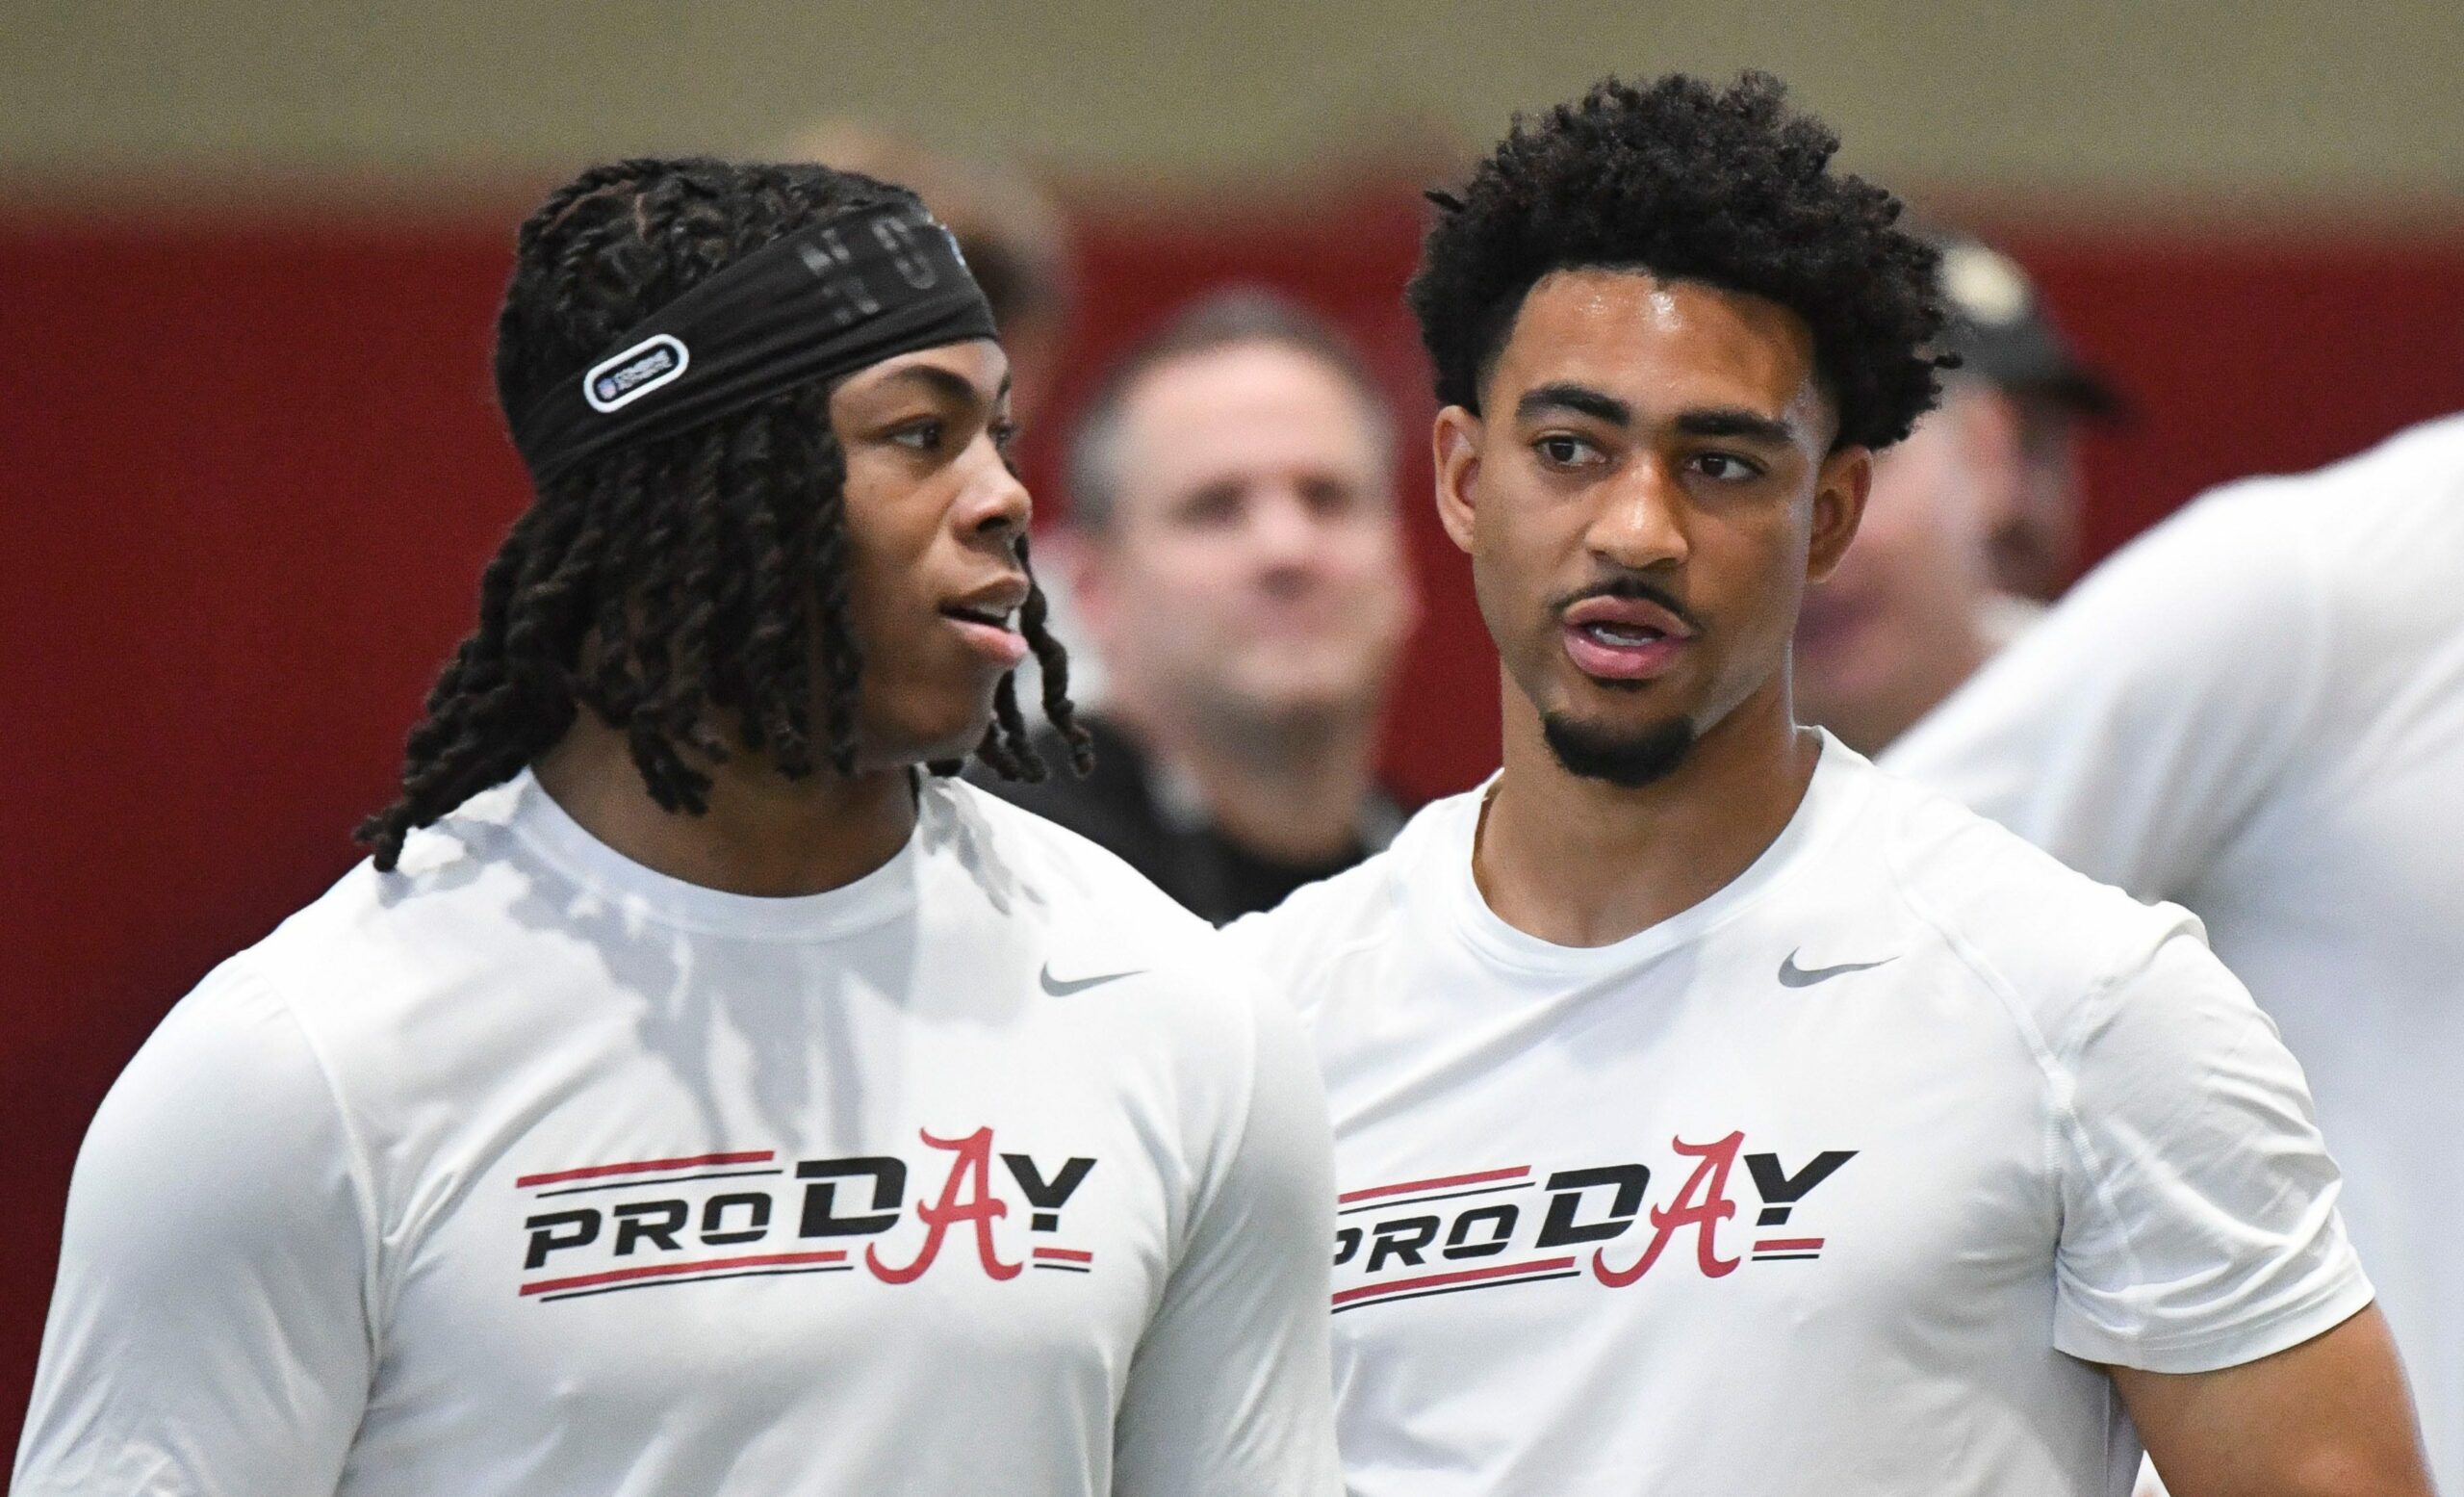 LOOK: Top images from Alabama football’s pro day